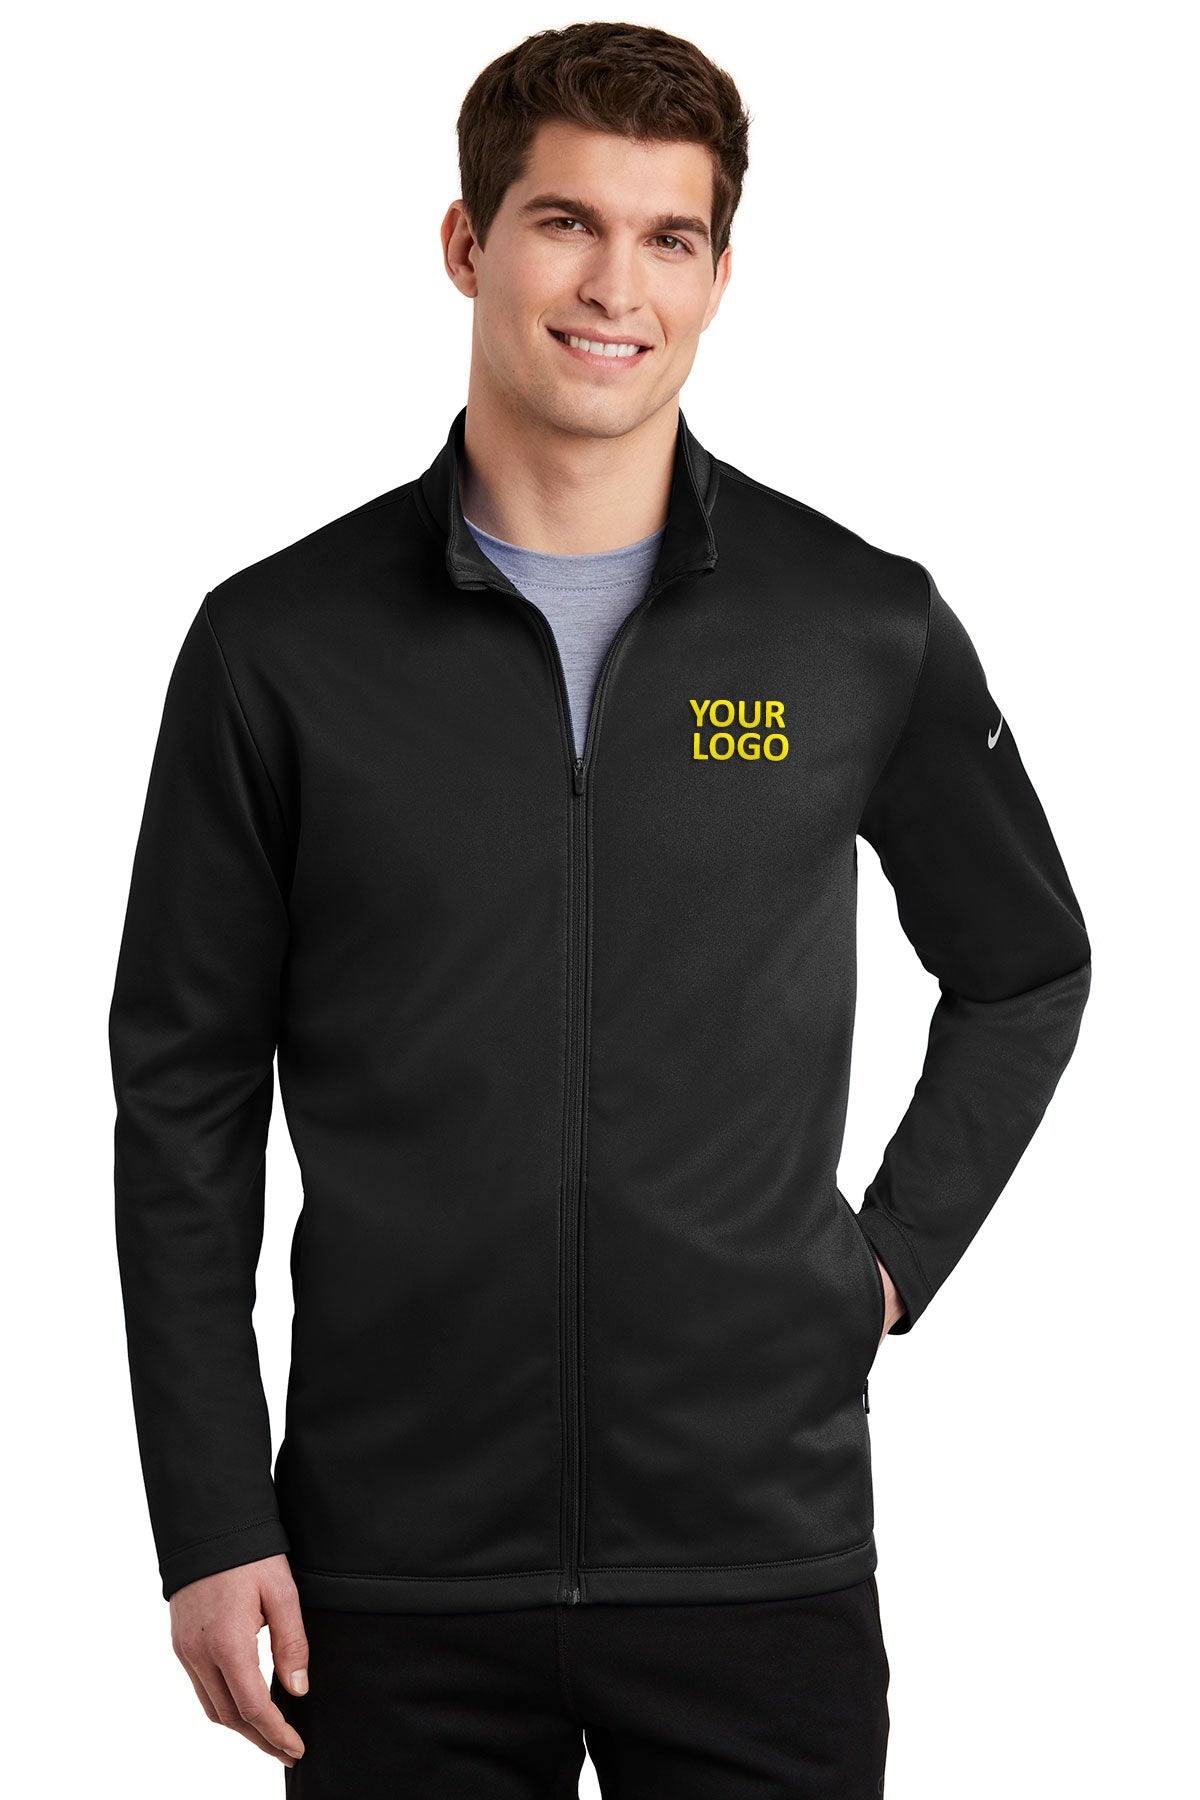 Nike Black NKAH6418 embroidered jackets for business